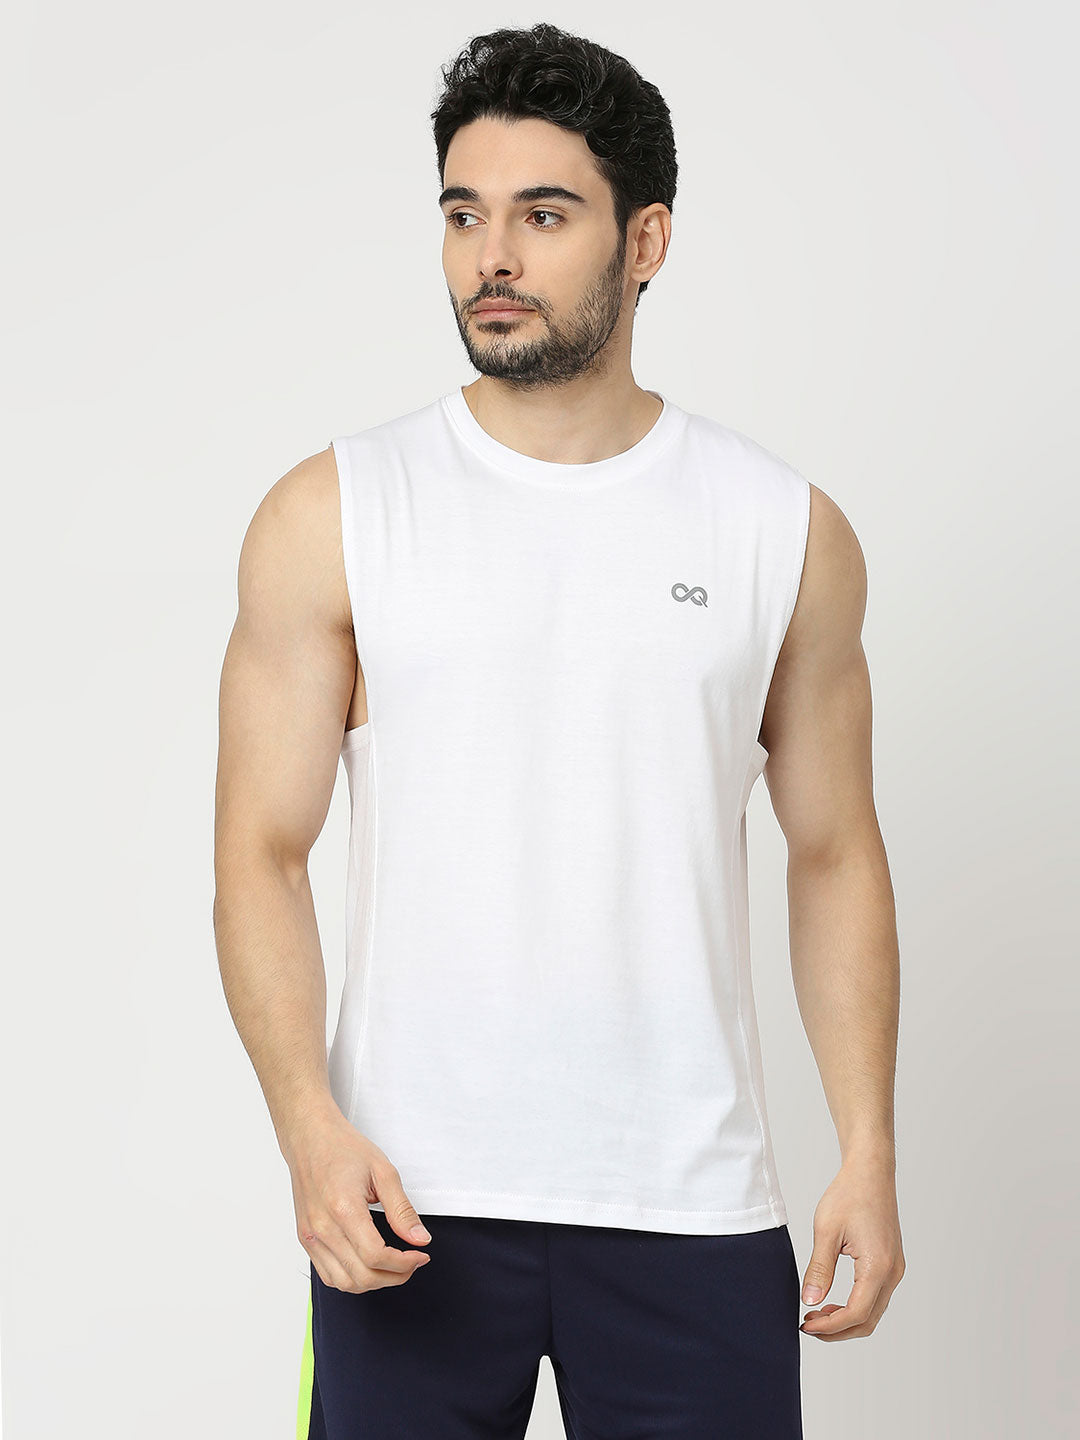 Shop Men's White Sports Vest - Stay Cool and Comfortable